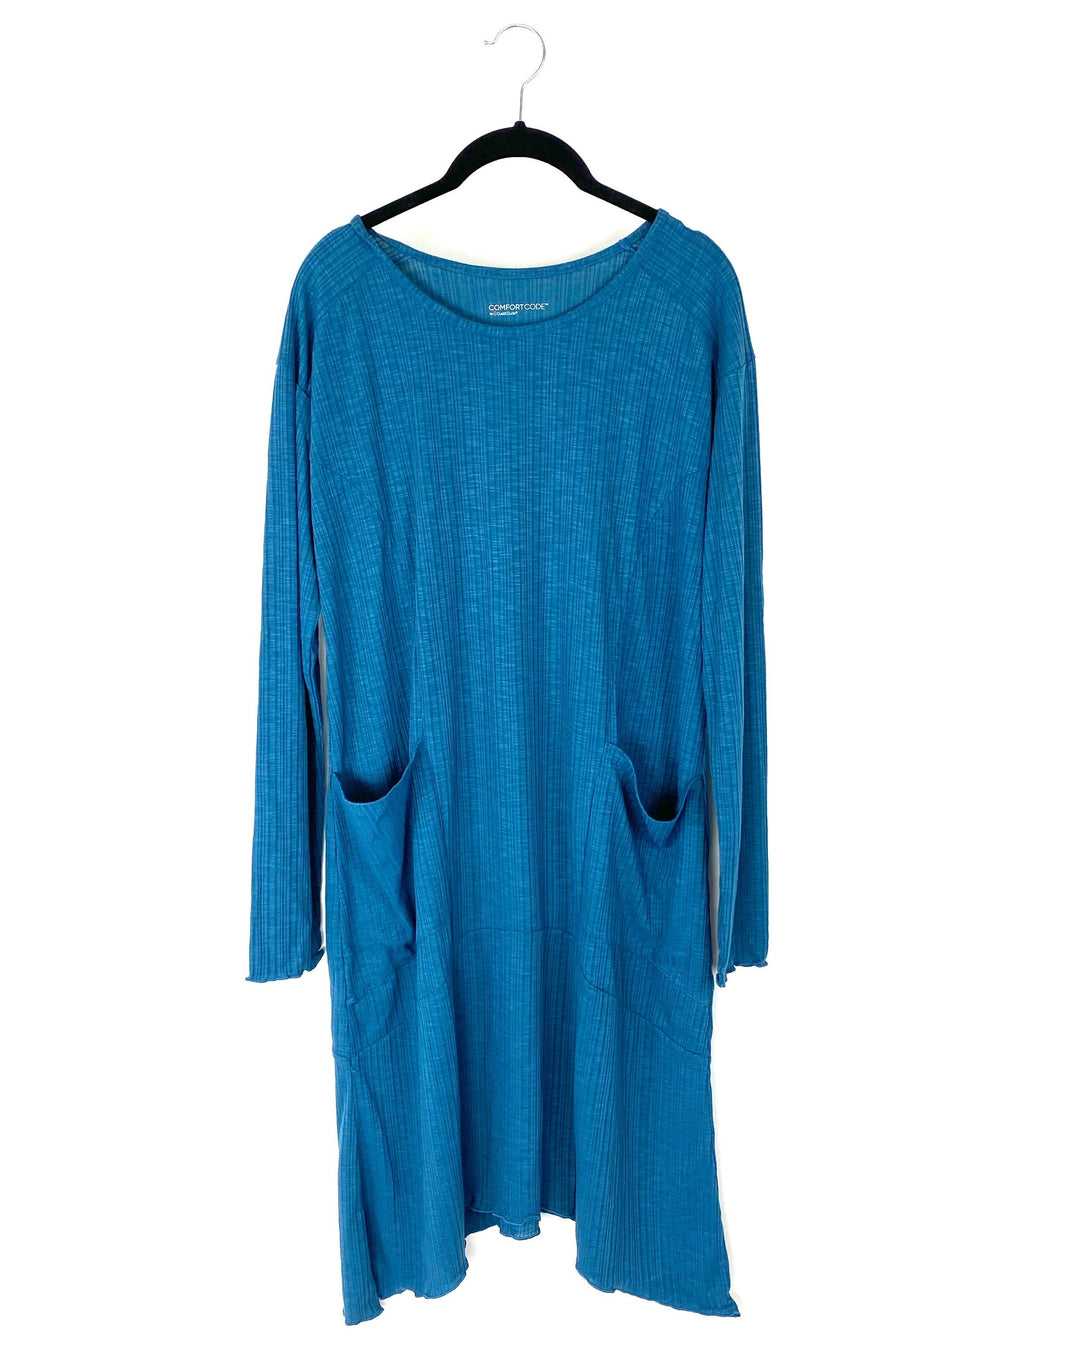 Dark Teal Long Sleeve Dress - Sizes 6/8 and 10/12